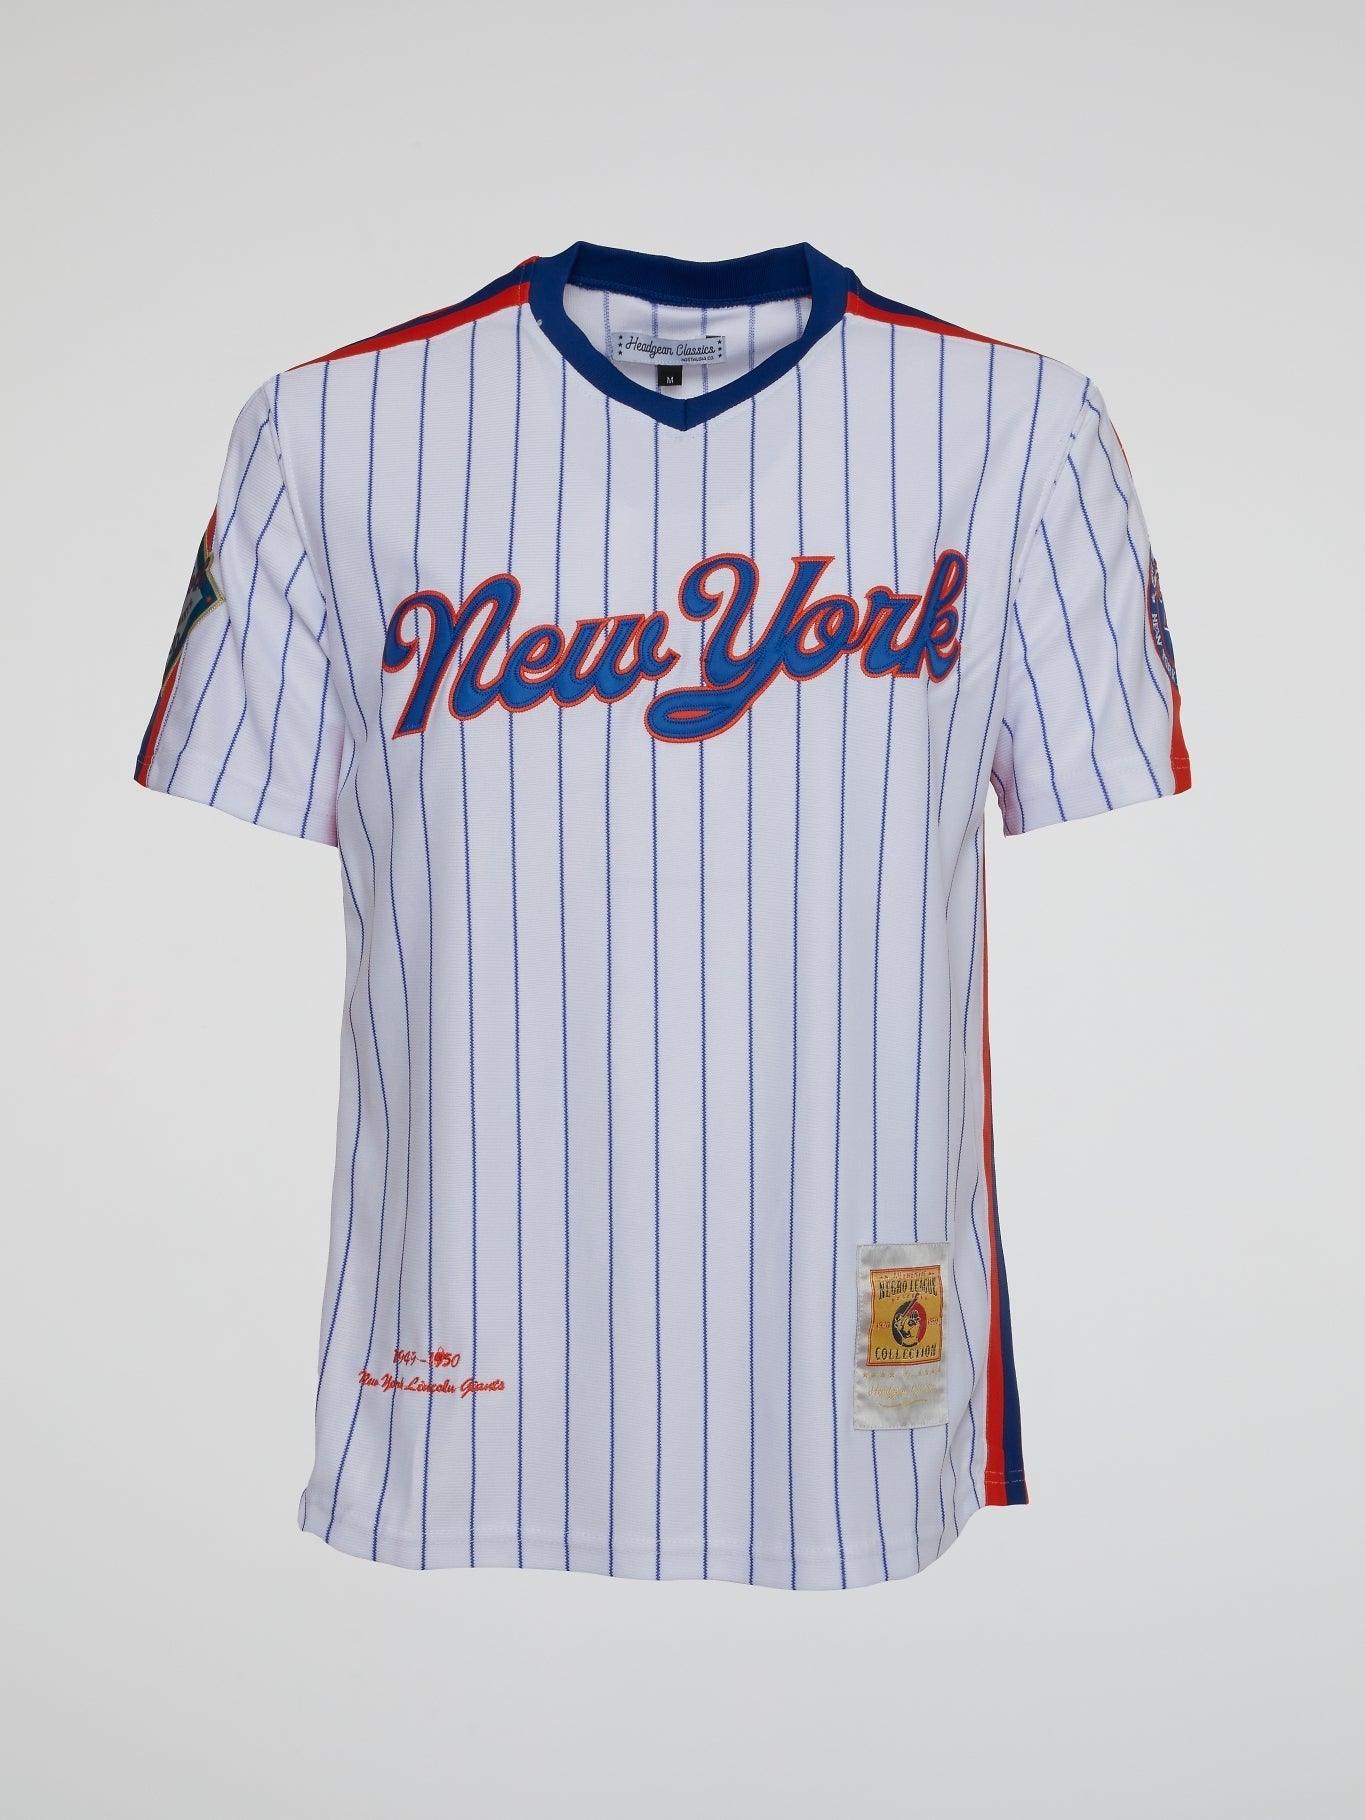 New York Lincoln Giants Negro League Authentic Baseball Jersey by